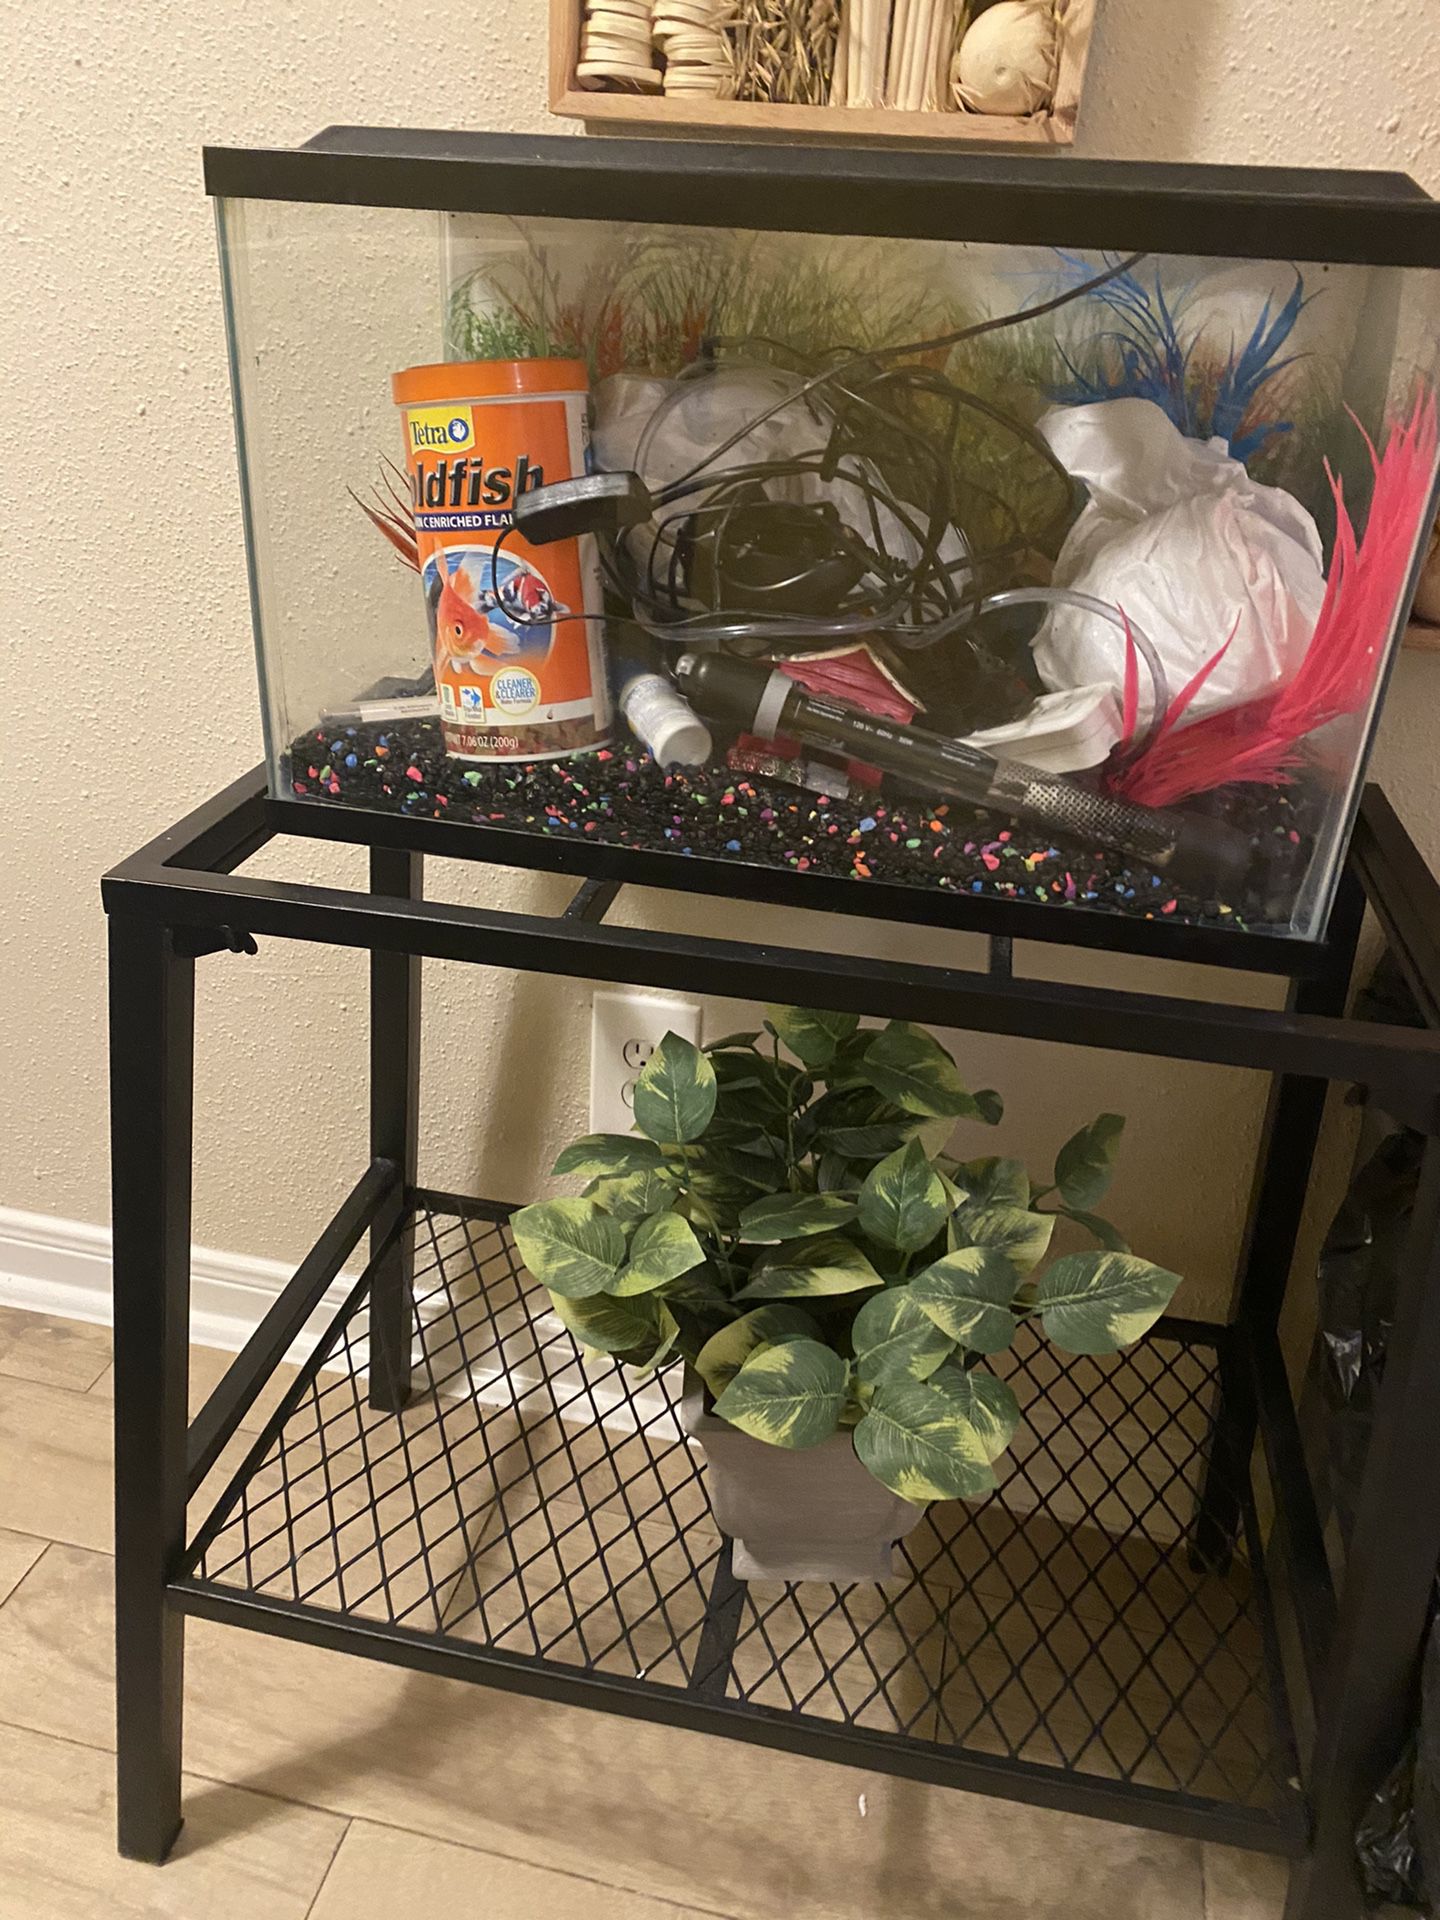 Fish tank With decorations and filter